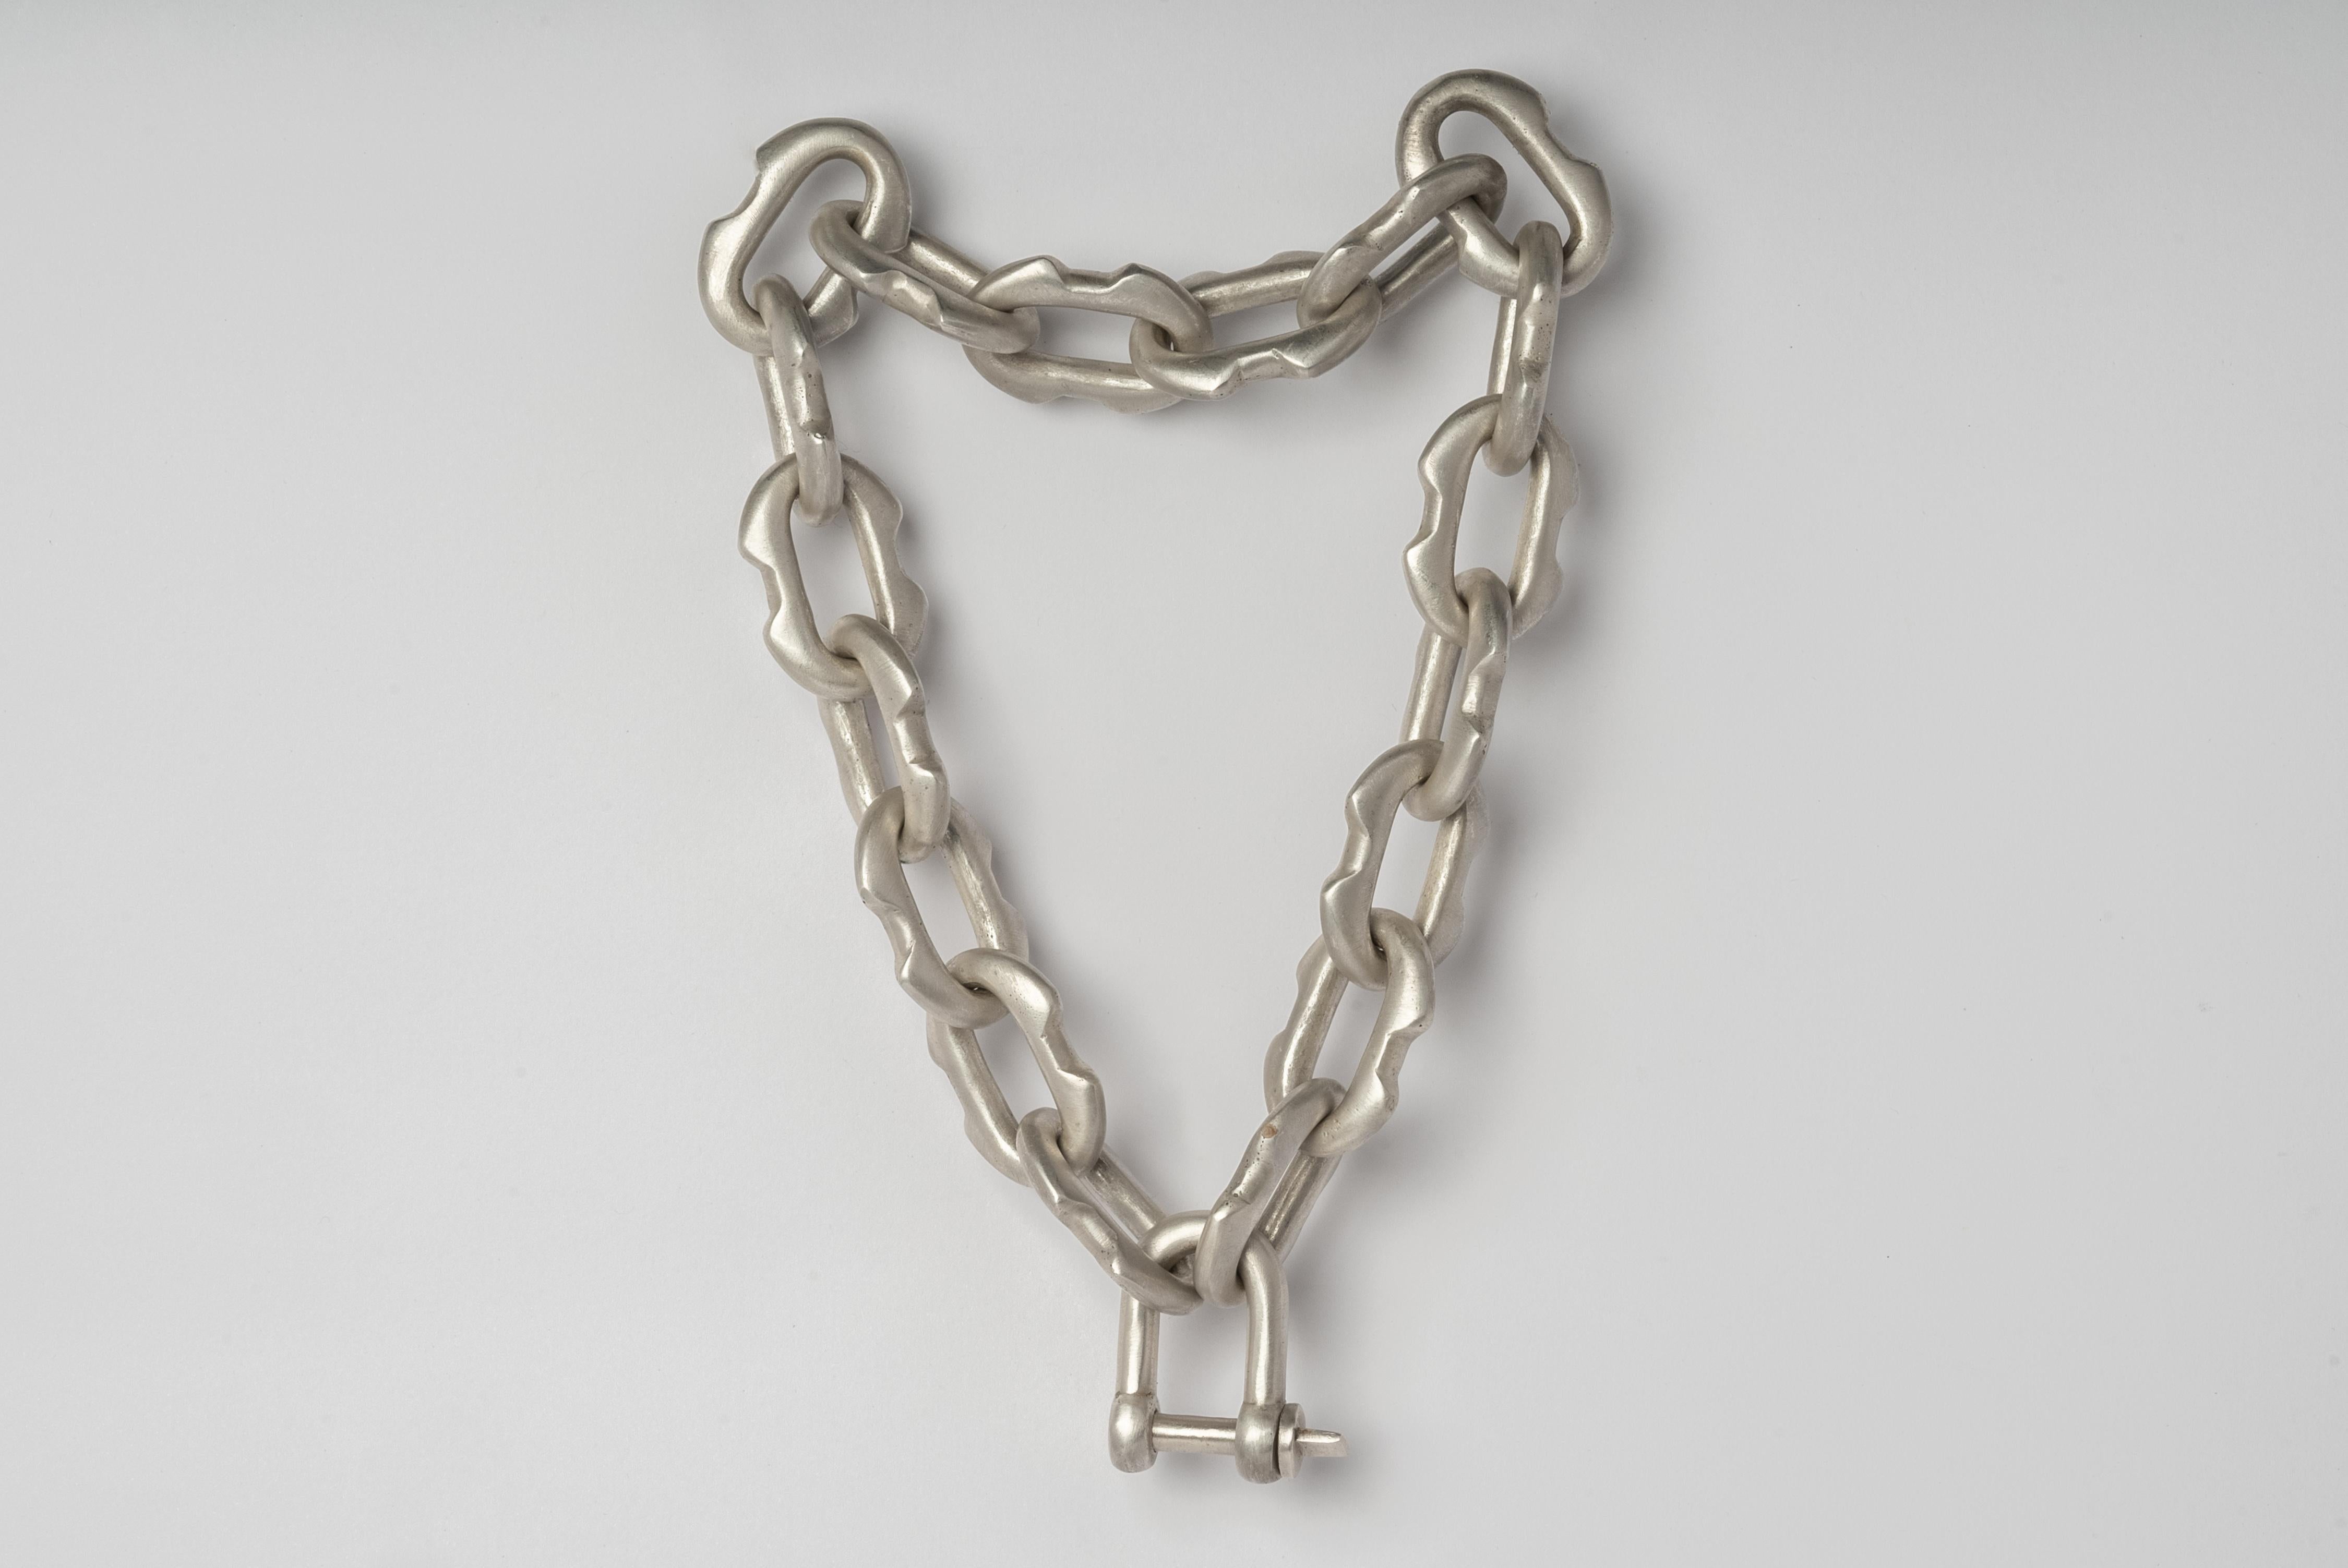 Charm Chain Choker (40cm, Small Deco Links, AS) In New Condition For Sale In Hong Kong, Hong Kong Island